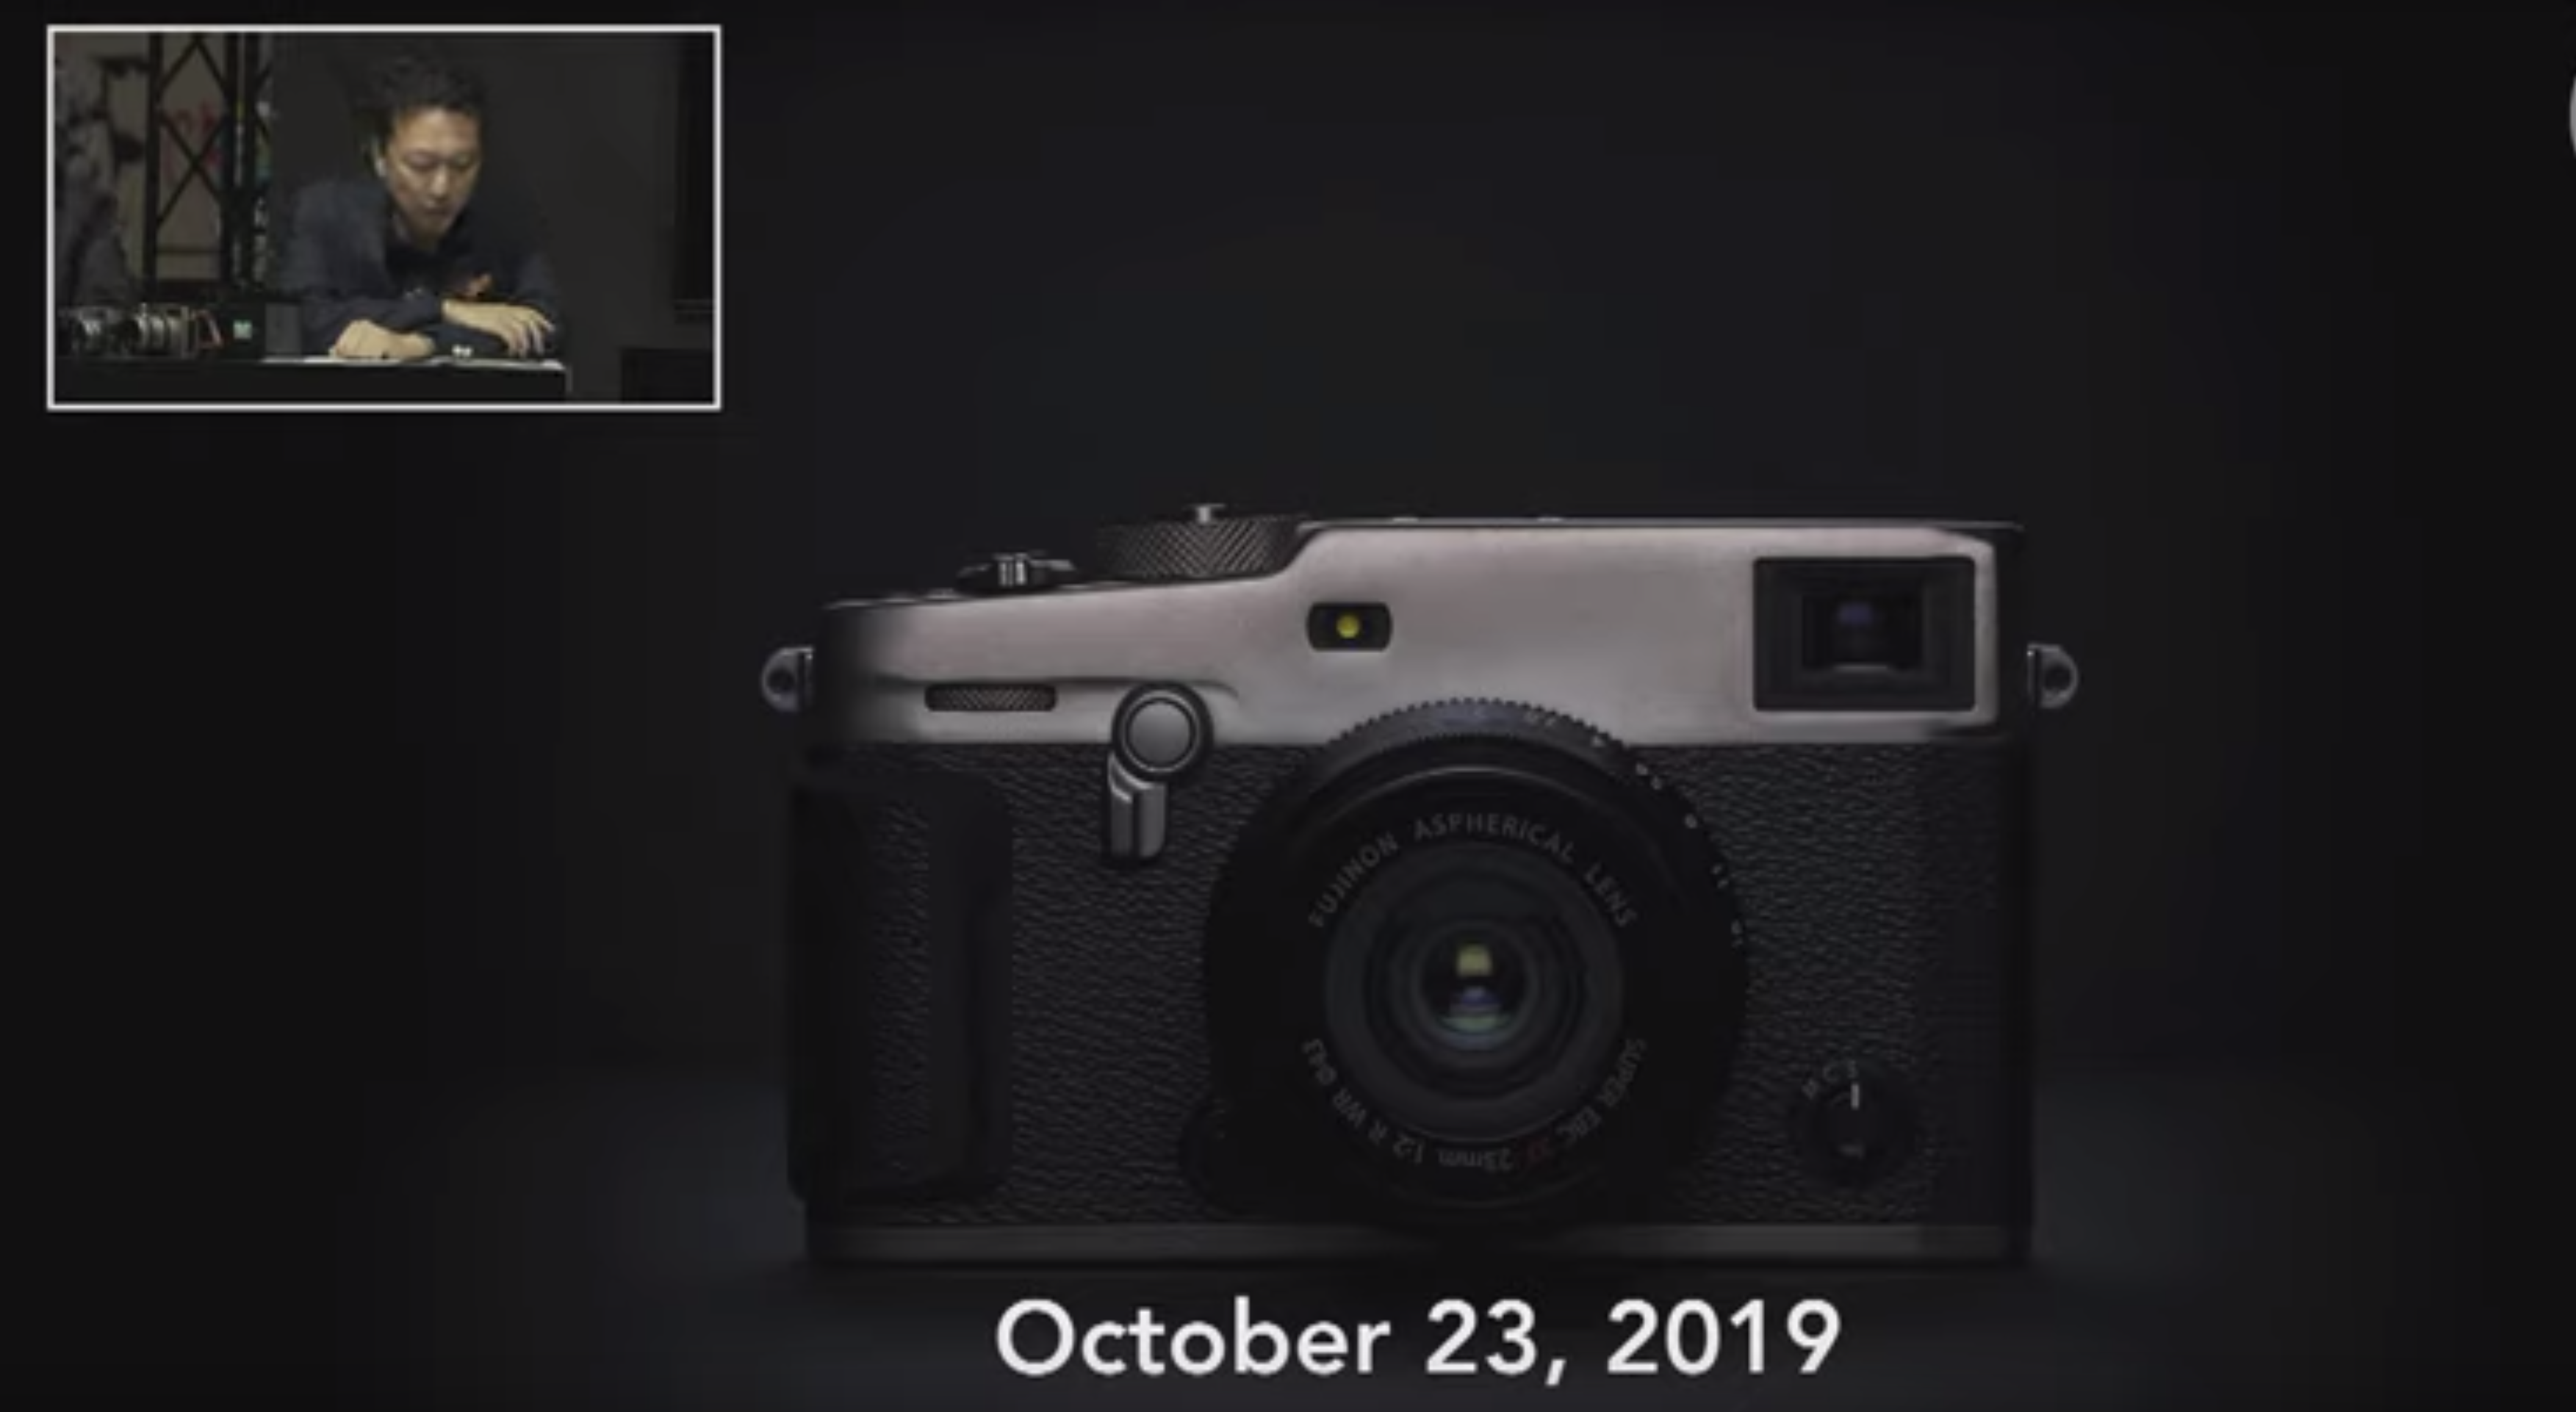 lezer Verpletteren stad 5 Ways the Fujifilm X Pro 3 Hints at What the Next X100 Camera is Like